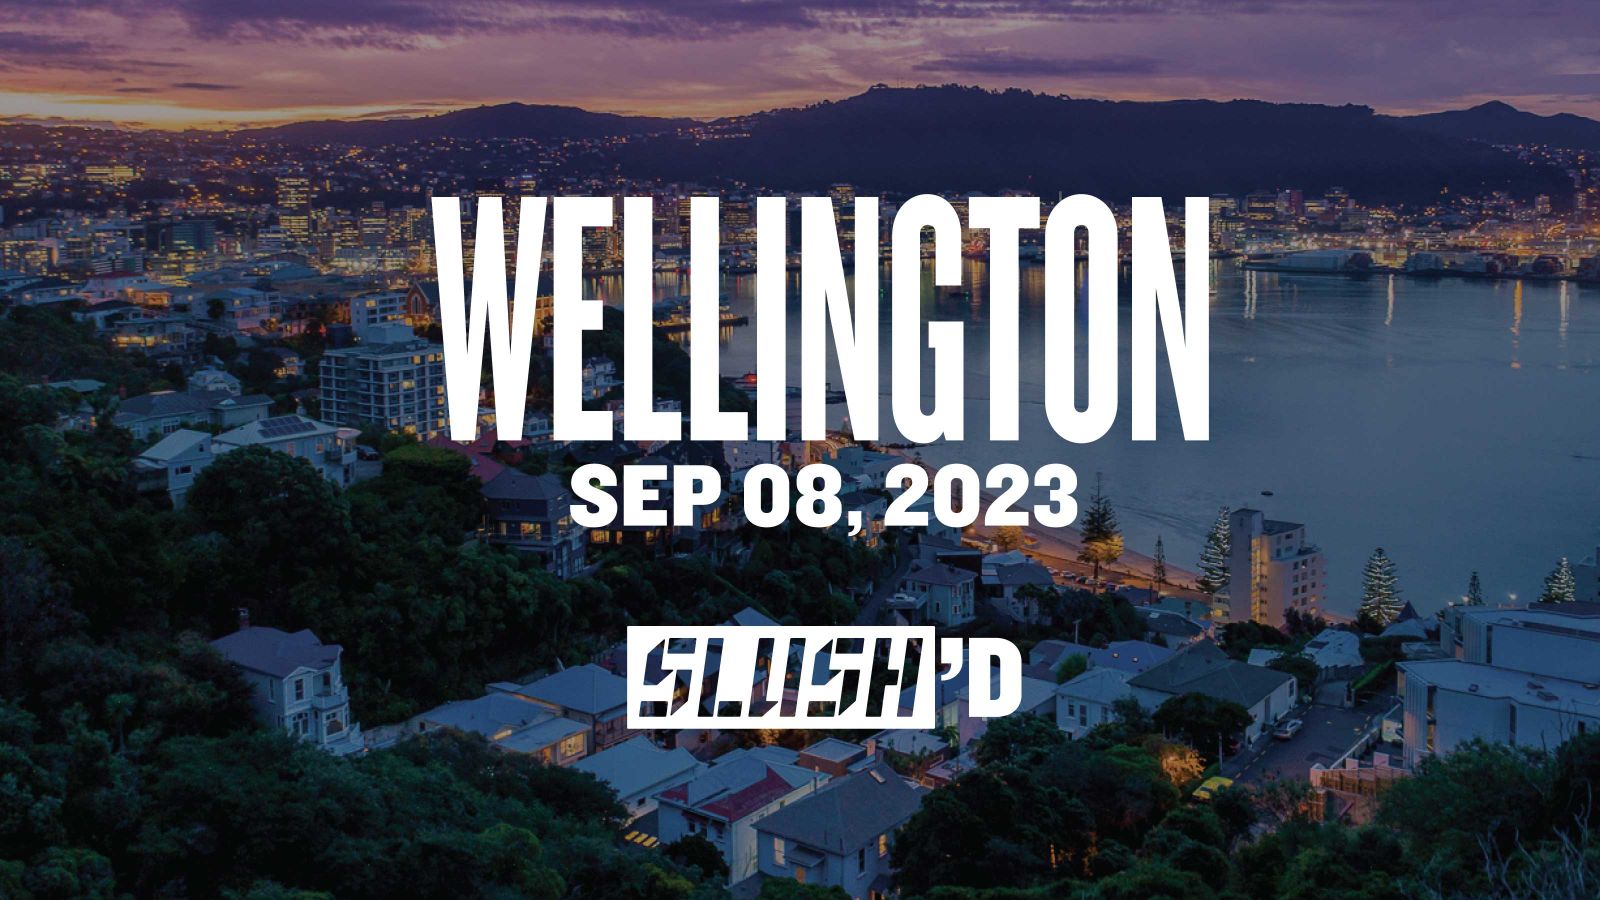 An image featuring a scenic view of Wellington, with houses surrounding a harbor, majestic mountains in the background, and a breathtaking sunset on the horizon.